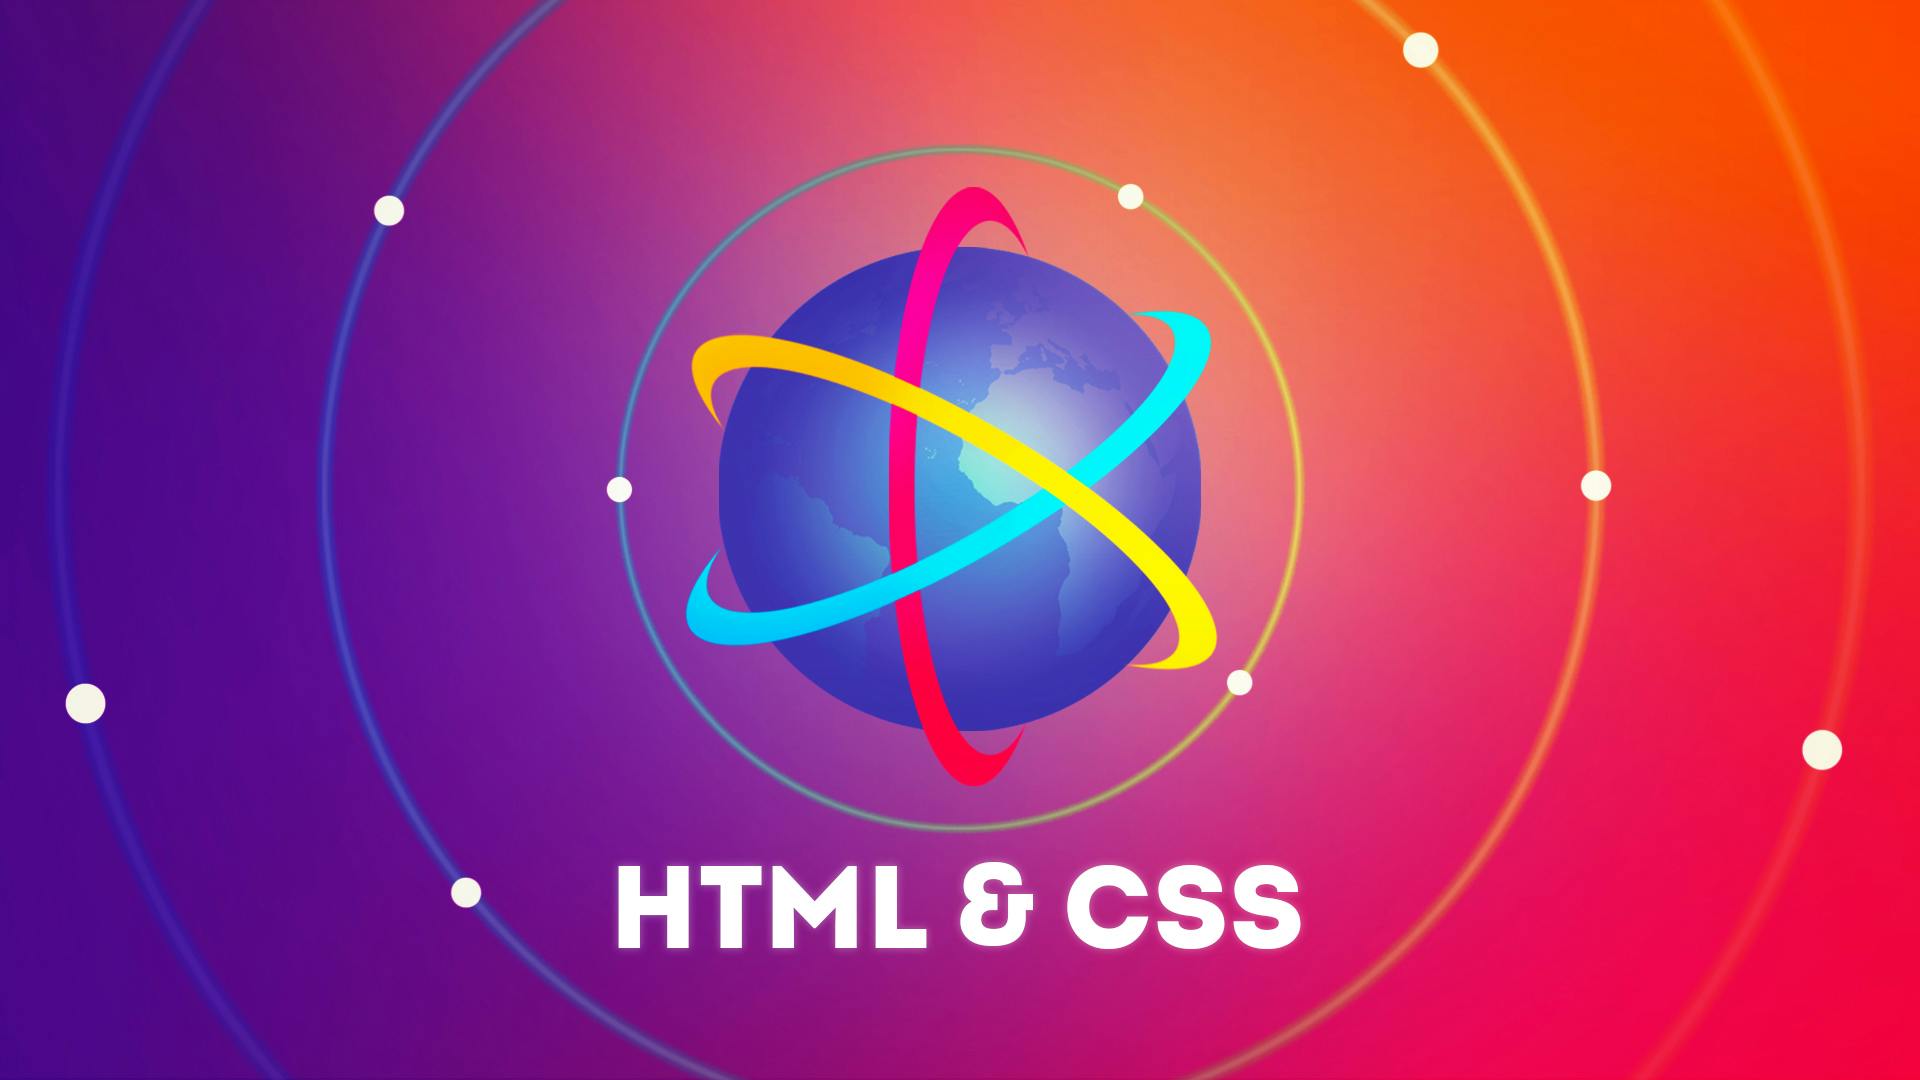 The Ultimate HTML5 & CSS3 Series